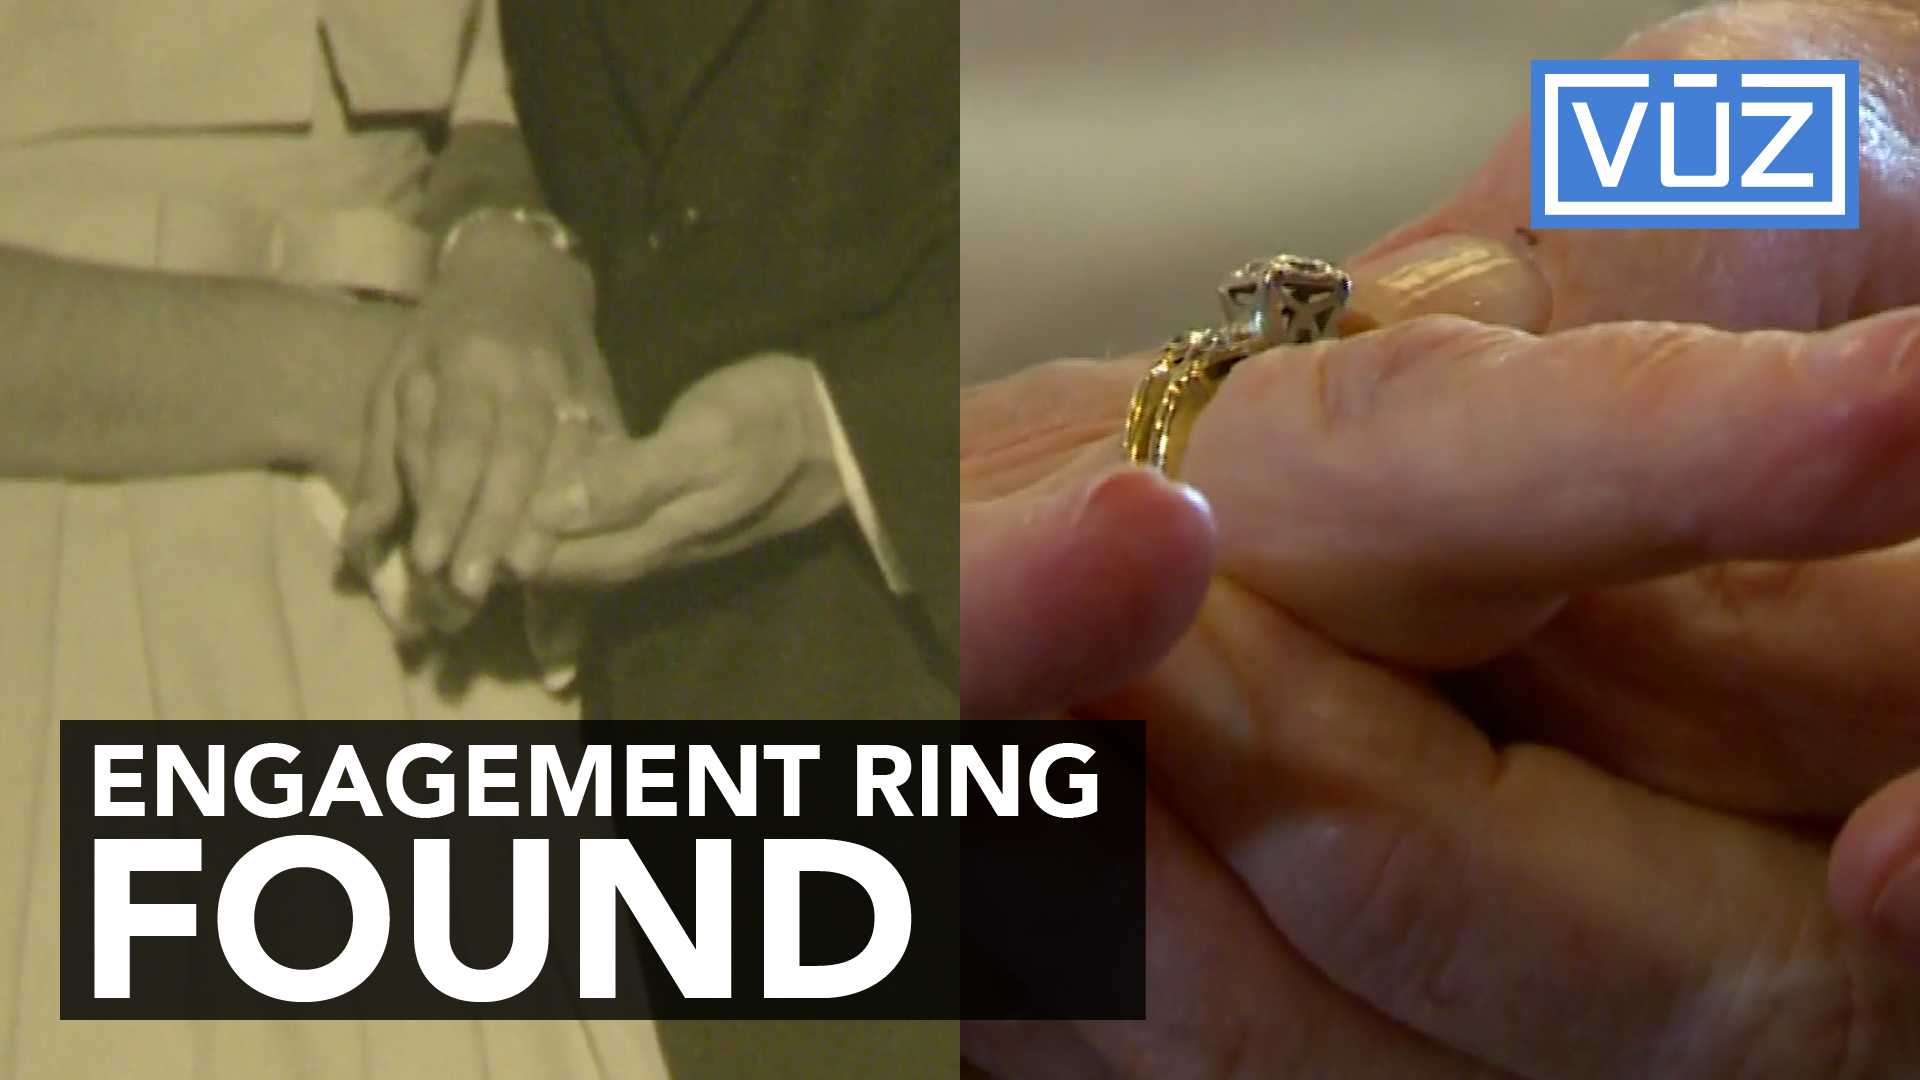 Engagement ring found decades after being lost